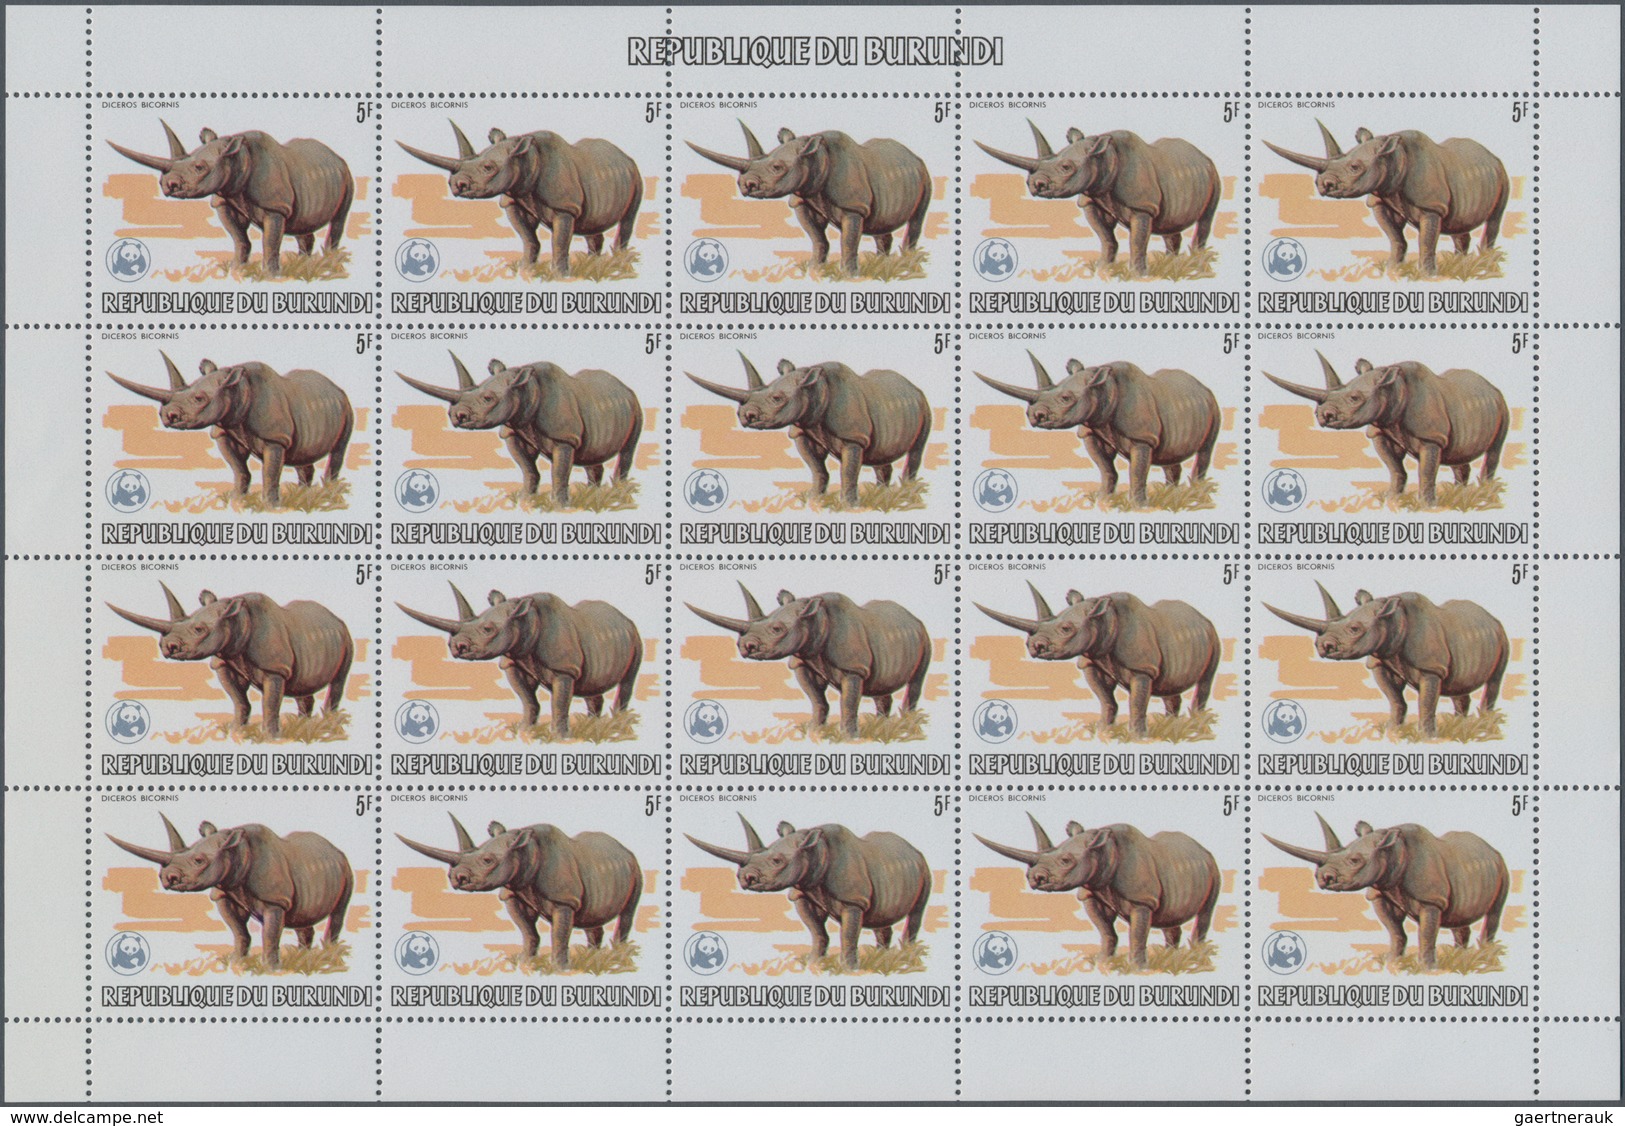 Burundi: 1982. AFRICAN WILDLIFE. Complete set of 13 from 2fr. to 85fr. in complete sheets of 20 stam